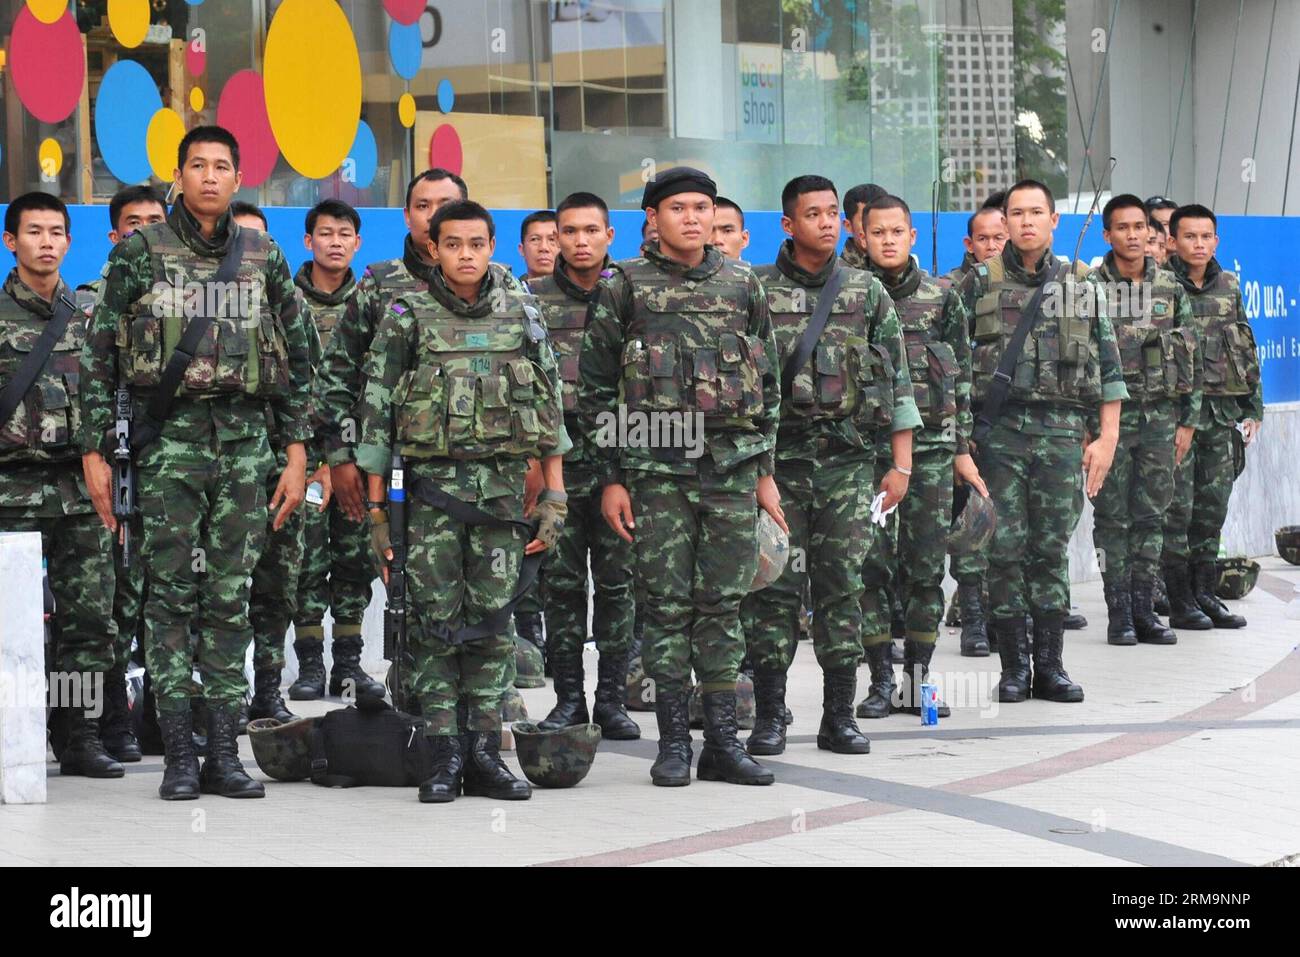 (140528) -- BANGKOK, May 28, 2014 (Xinhua) -- Thai soldiers stand at attention outside the Art Culture Center in Bangkok, Thailand, May 28, 2014. Thailand s coup was credit negative for Thailand s tourist sector for reasons including travel warnings against Thailand, the nationwide curfew as well as shortened operation hours of department stores and public transport. (Xinhua/Rachen Sageamsak) (zjy) THAILAND-BANGKOK-COUP PUBLICATIONxNOTxINxCHN   Bangkok May 28 2014 XINHUA Thai Soldiers stand AT Attention outside The Art Culture Center in Bangkok Thai country May 28 2014 Thai country S Coup what Stock Photo